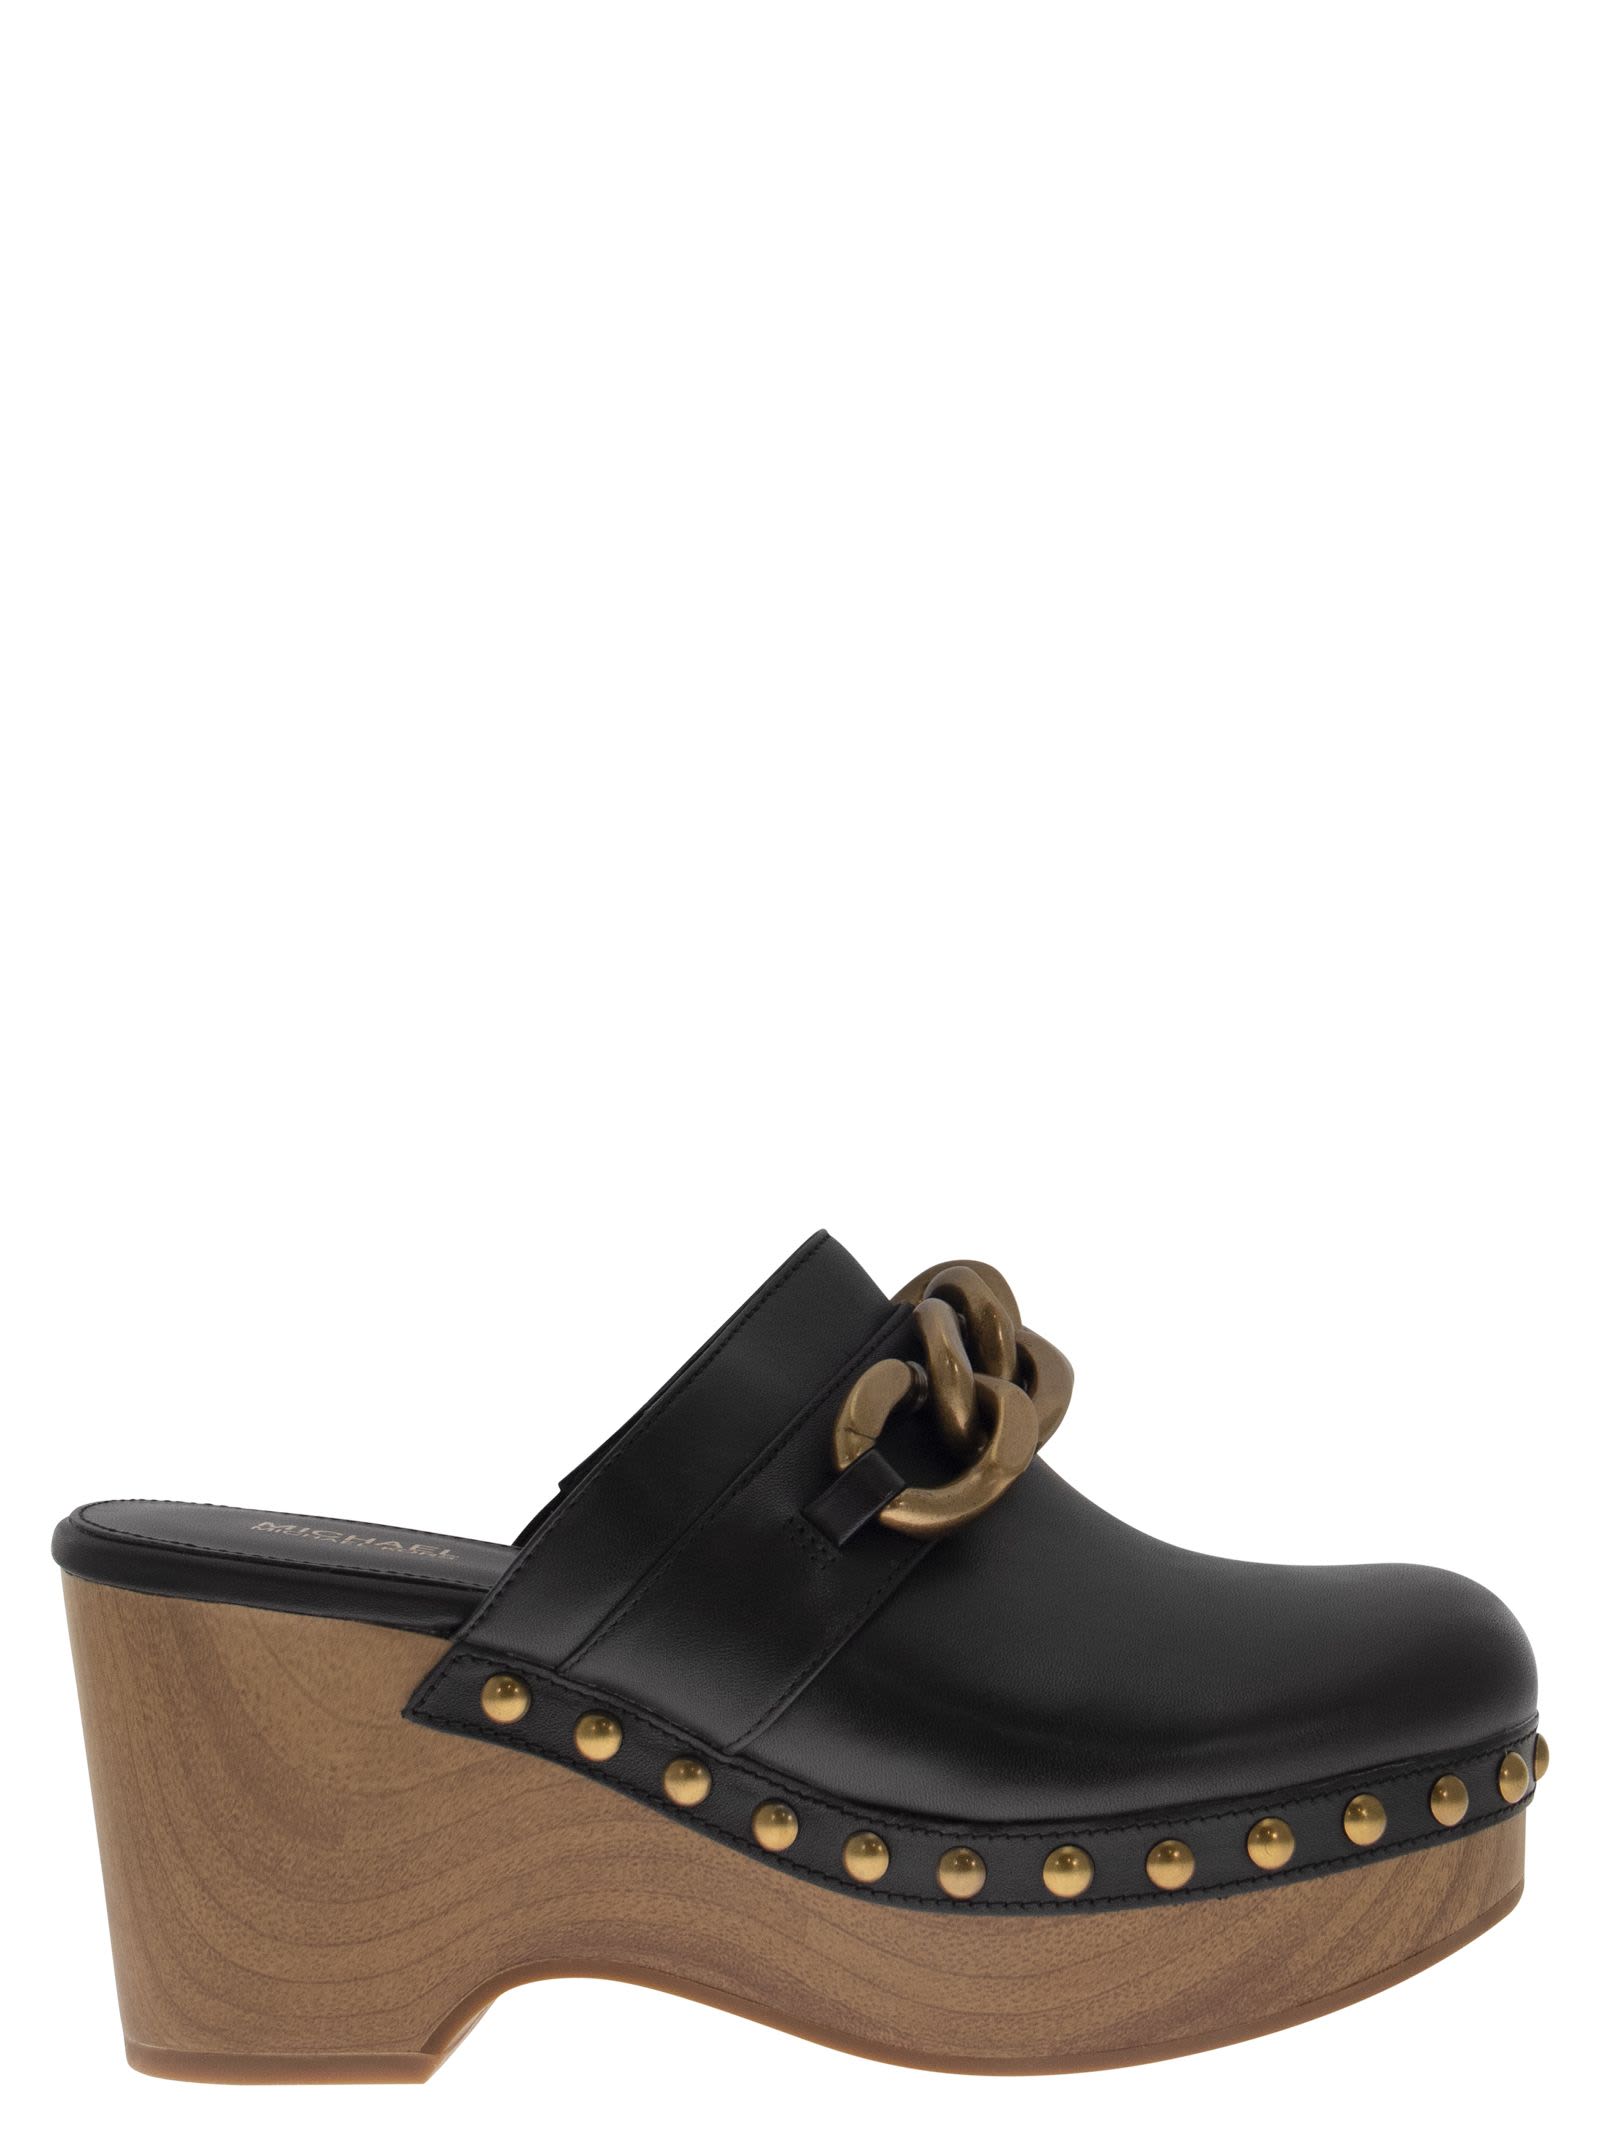 Michael Kors Scarlett Leather Clog With Decorations And Platform